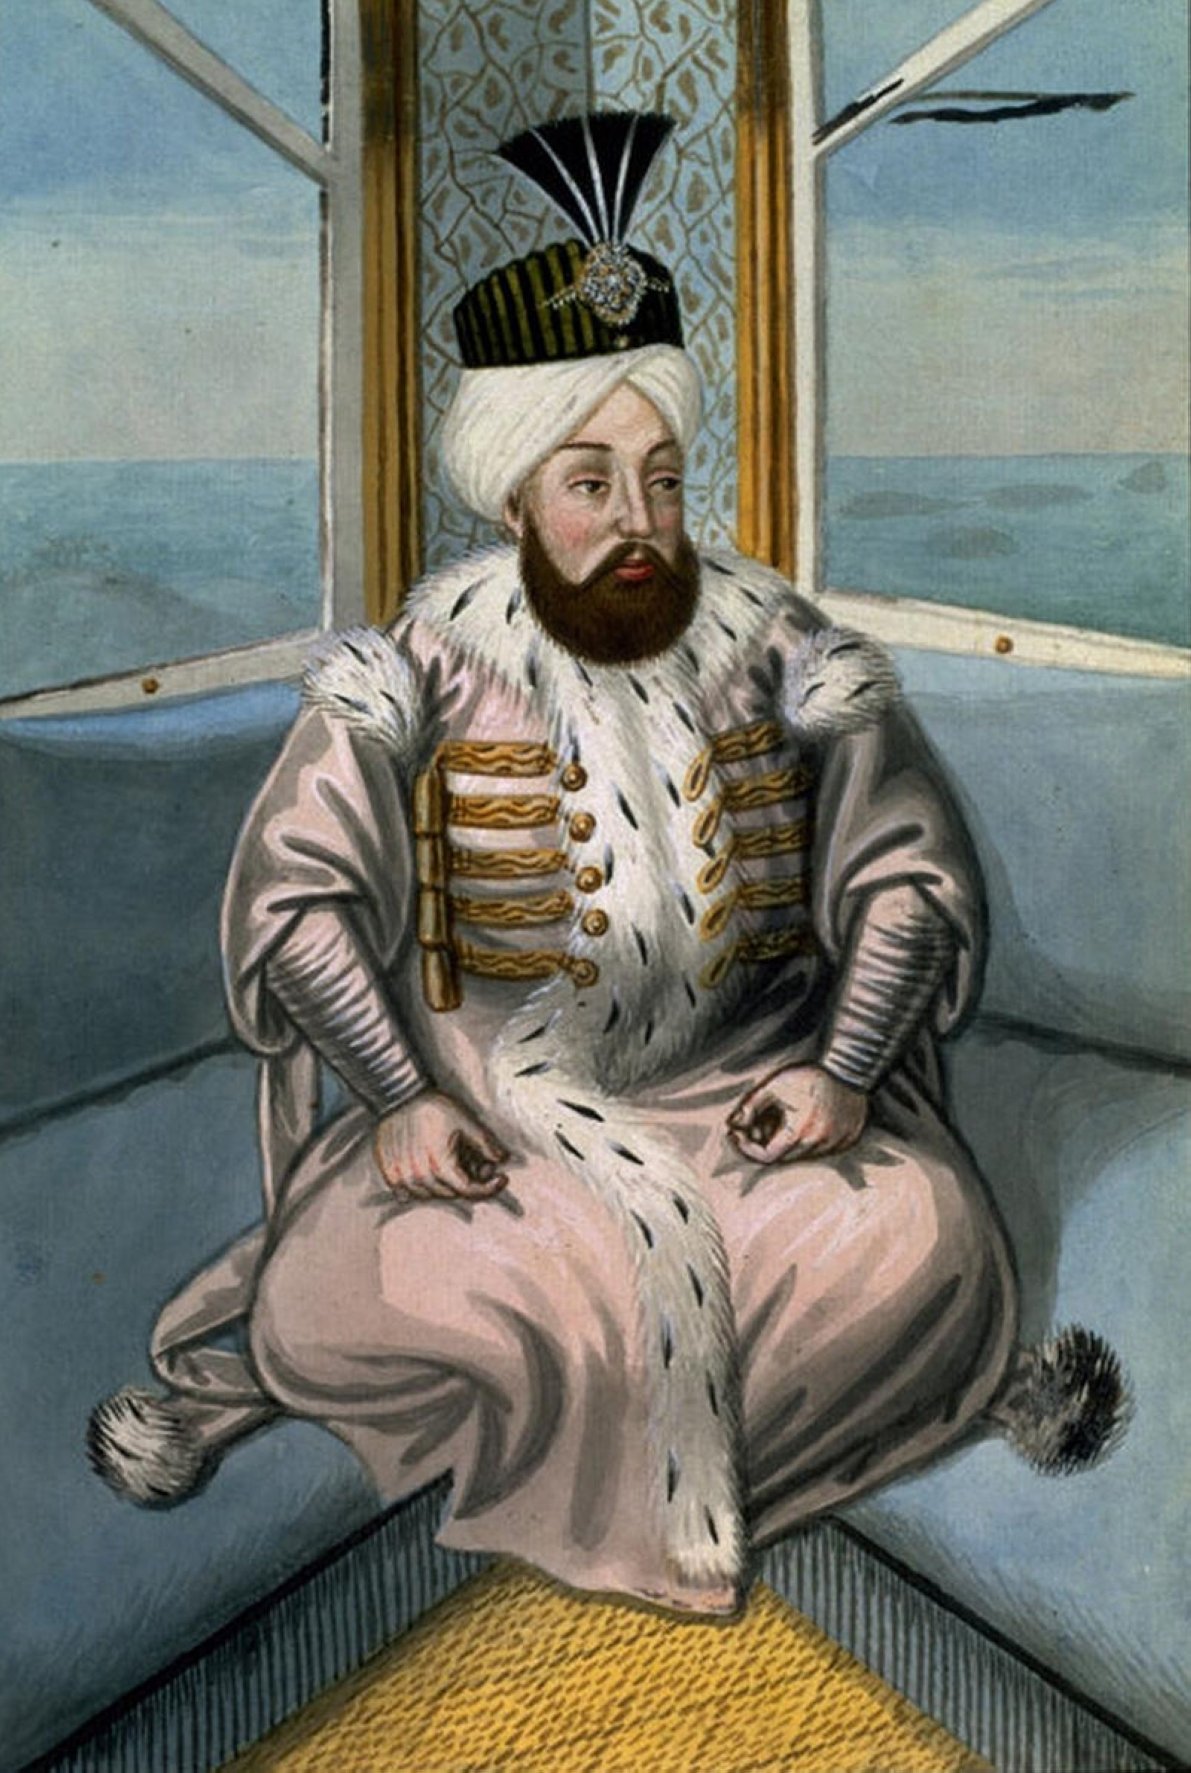  A depiction of Sultan Suleiman II by John Young.